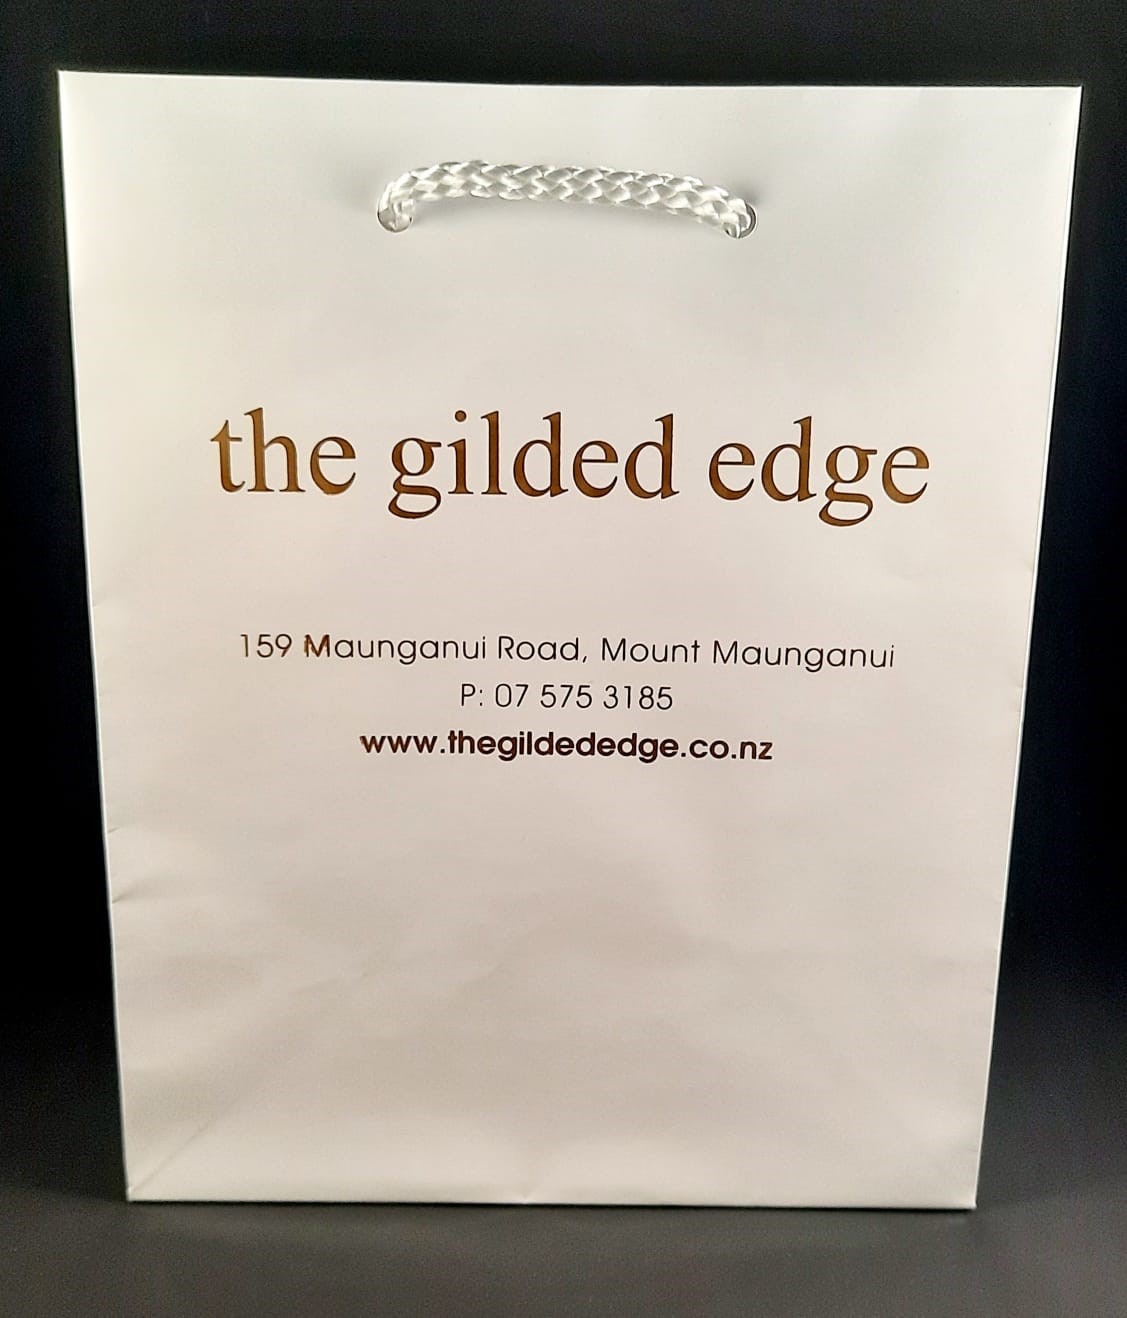 The Guilded Edge Branded Retail Bags